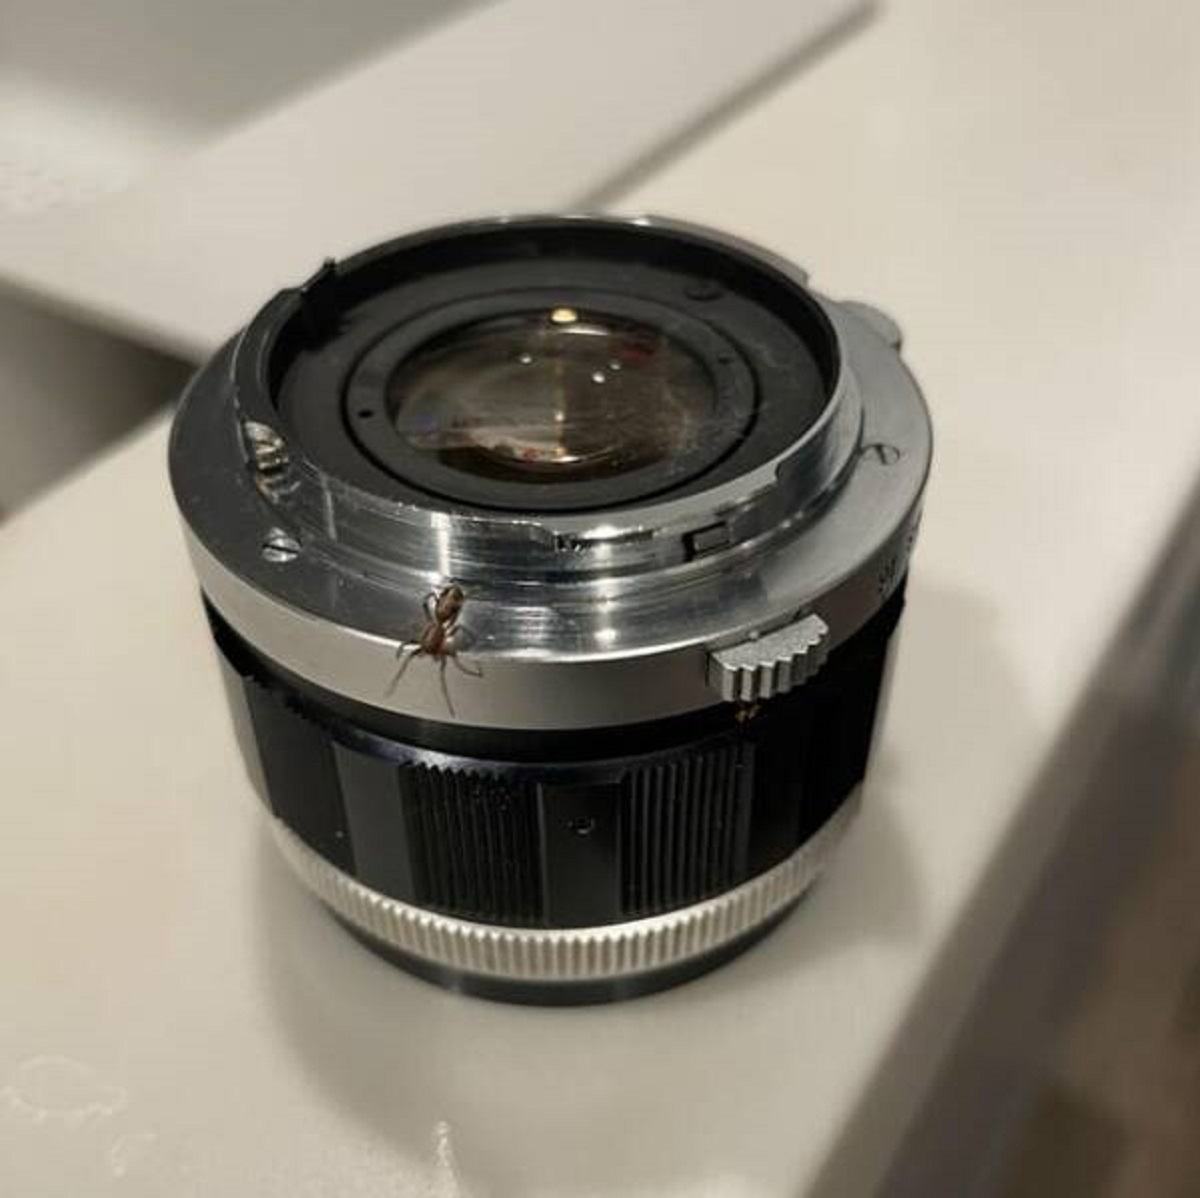 "Found a spider living inside my radioactive camera lens"